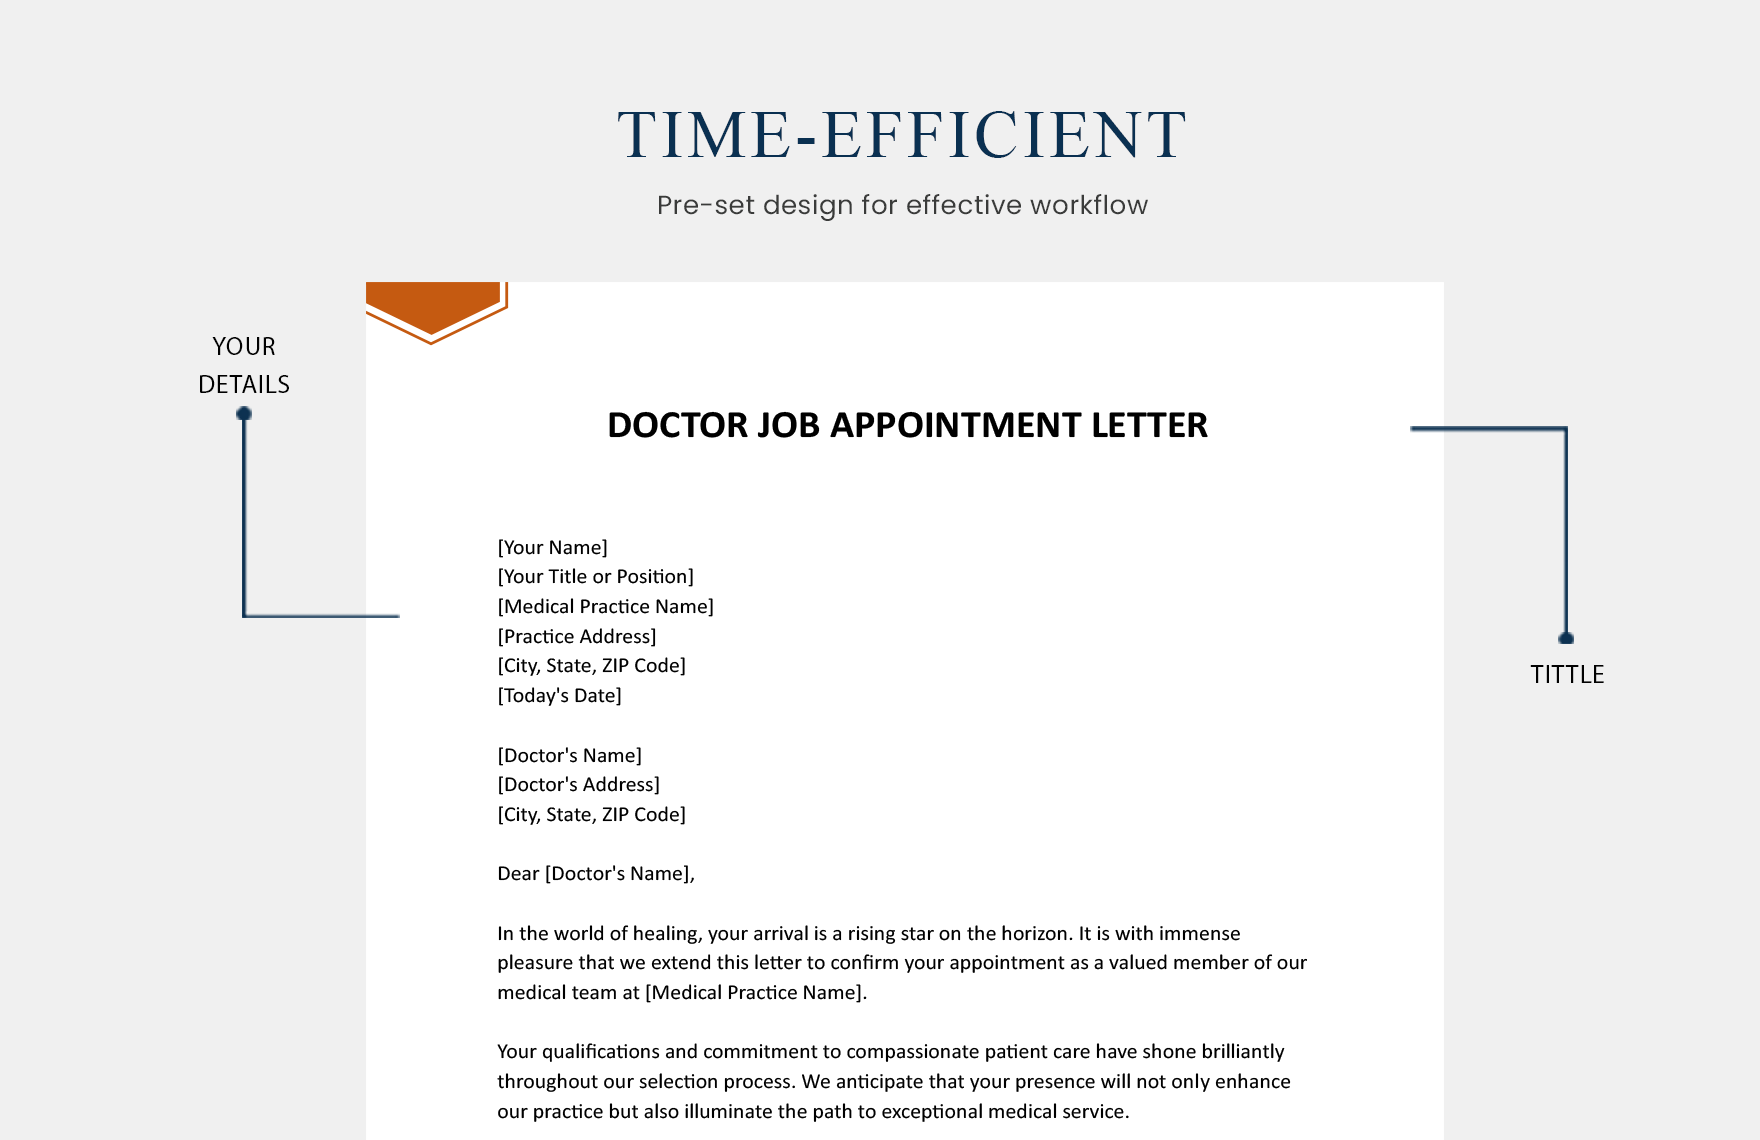 Doctor Job Appointment Letter